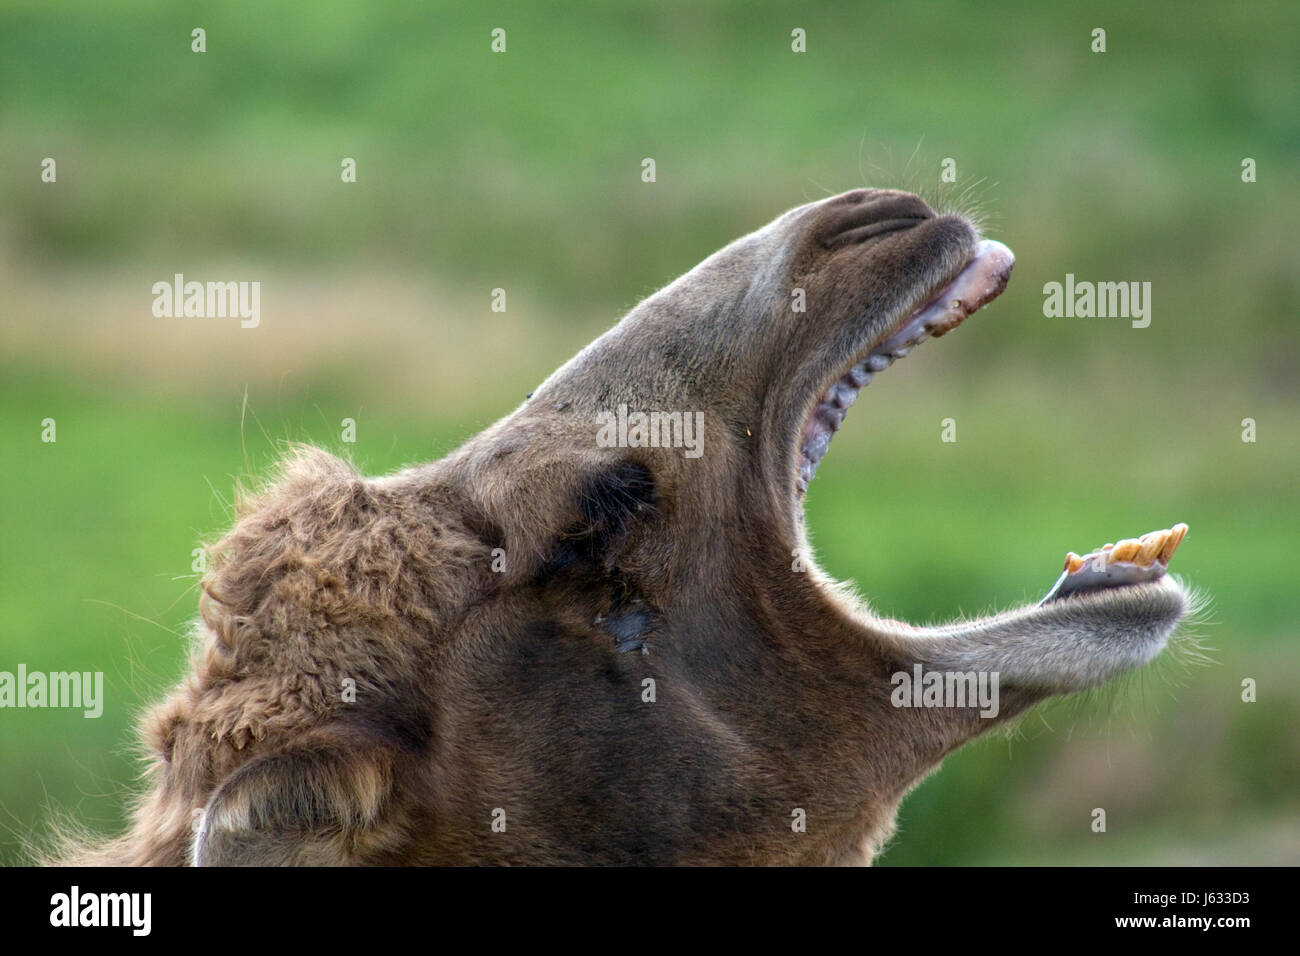 mouth teeth bit camel opened flap torn open head mouth teeth bit camel open Stock Photo